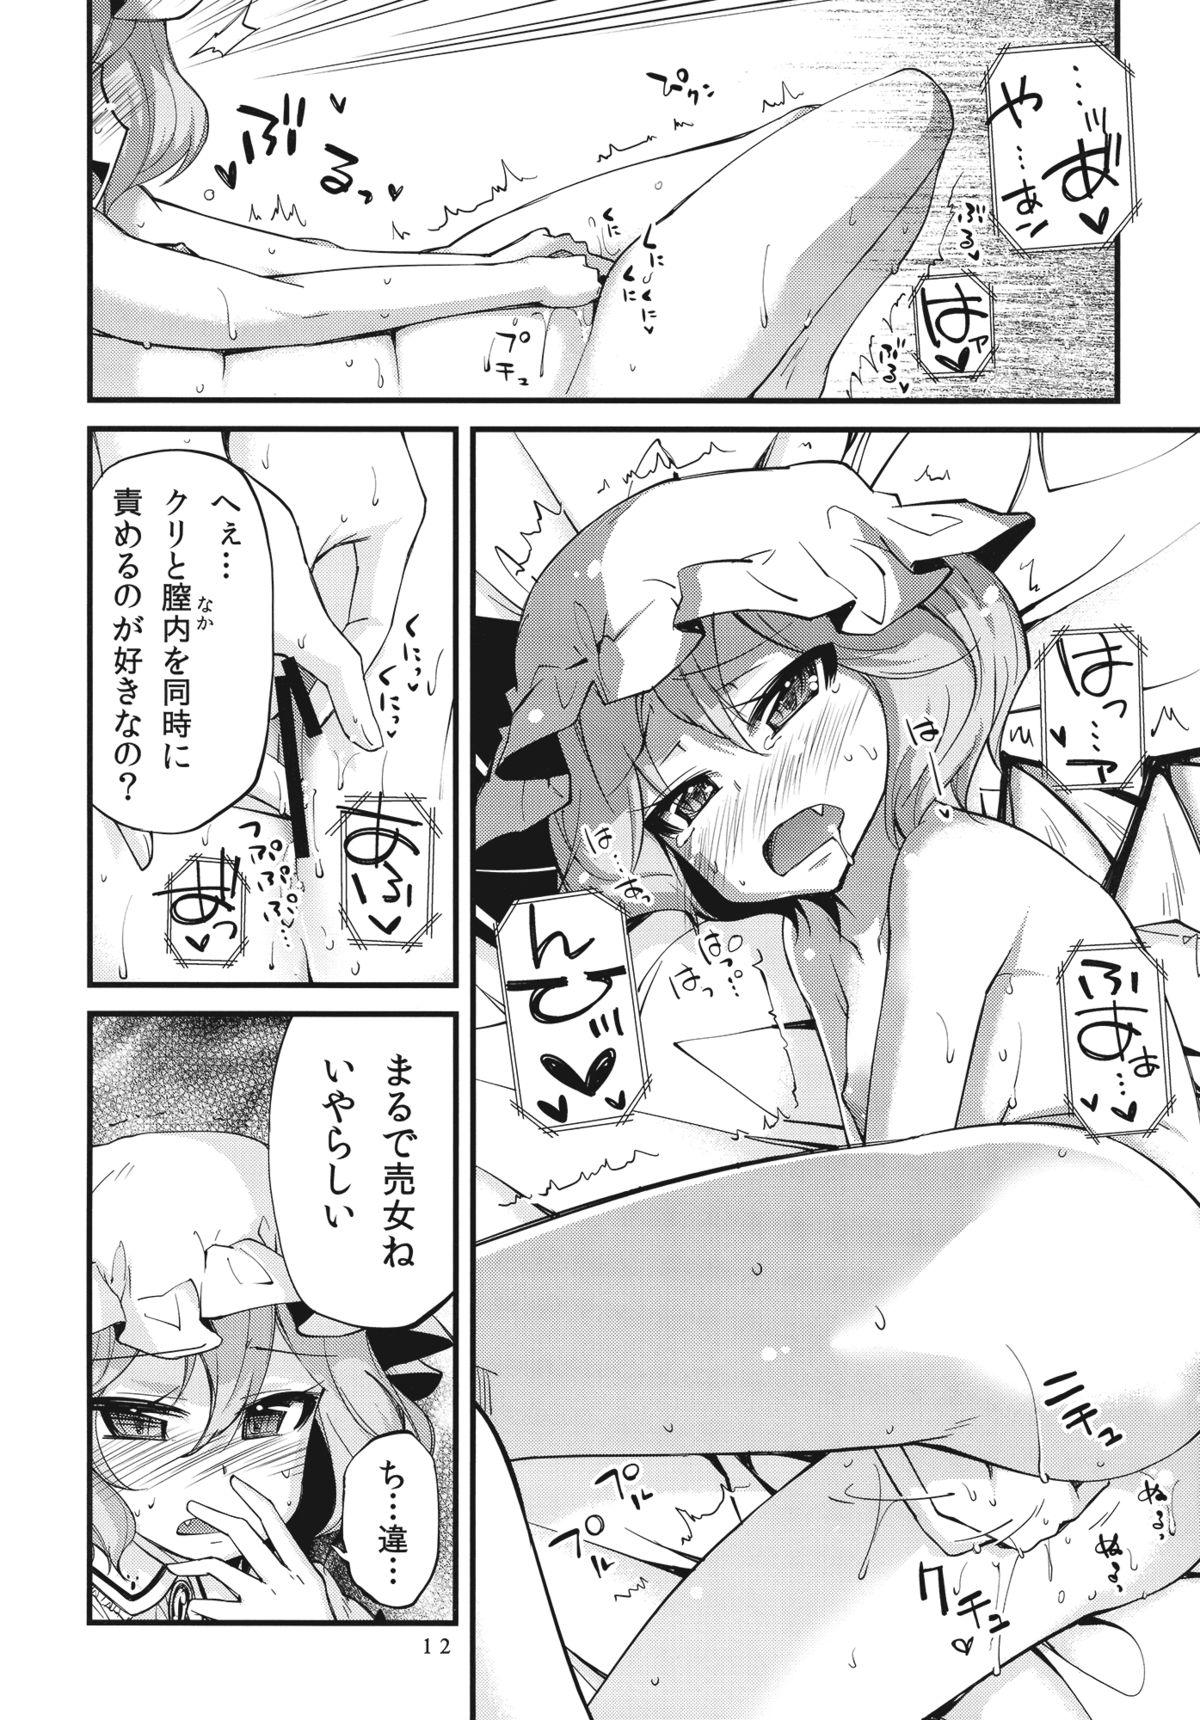 Cheating .REC - Touhou project Cachonda - Page 12